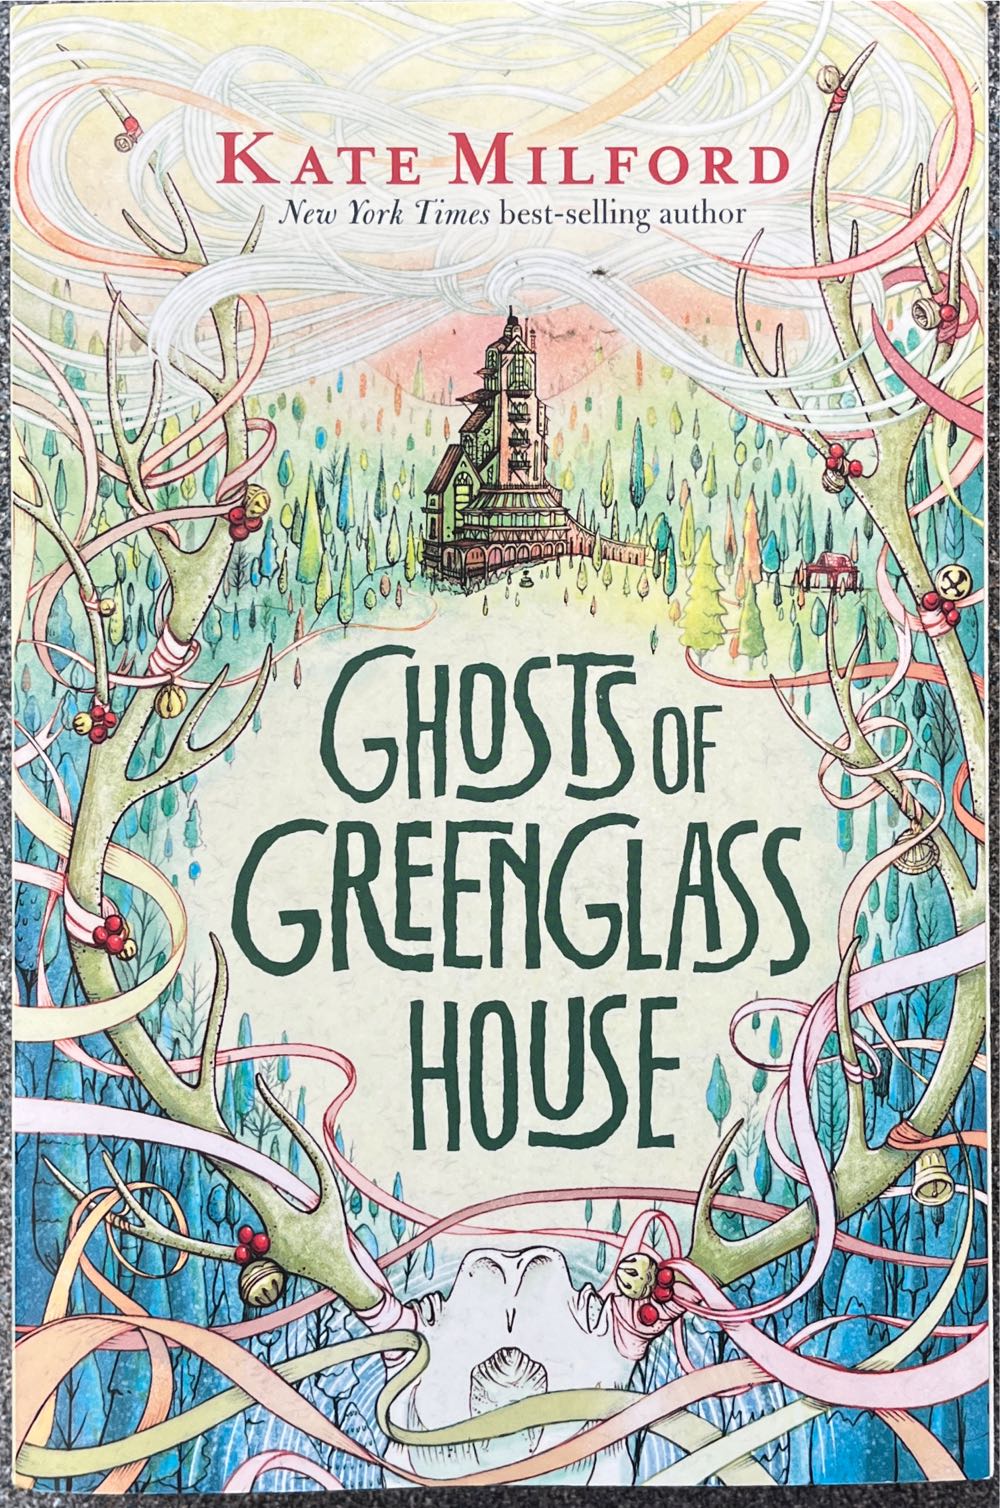 Ghosts of Greenglass House - Kate Milford (Hmh Books for Young Readers) book collectible [Barcode 9781328594426] - Main Image 1